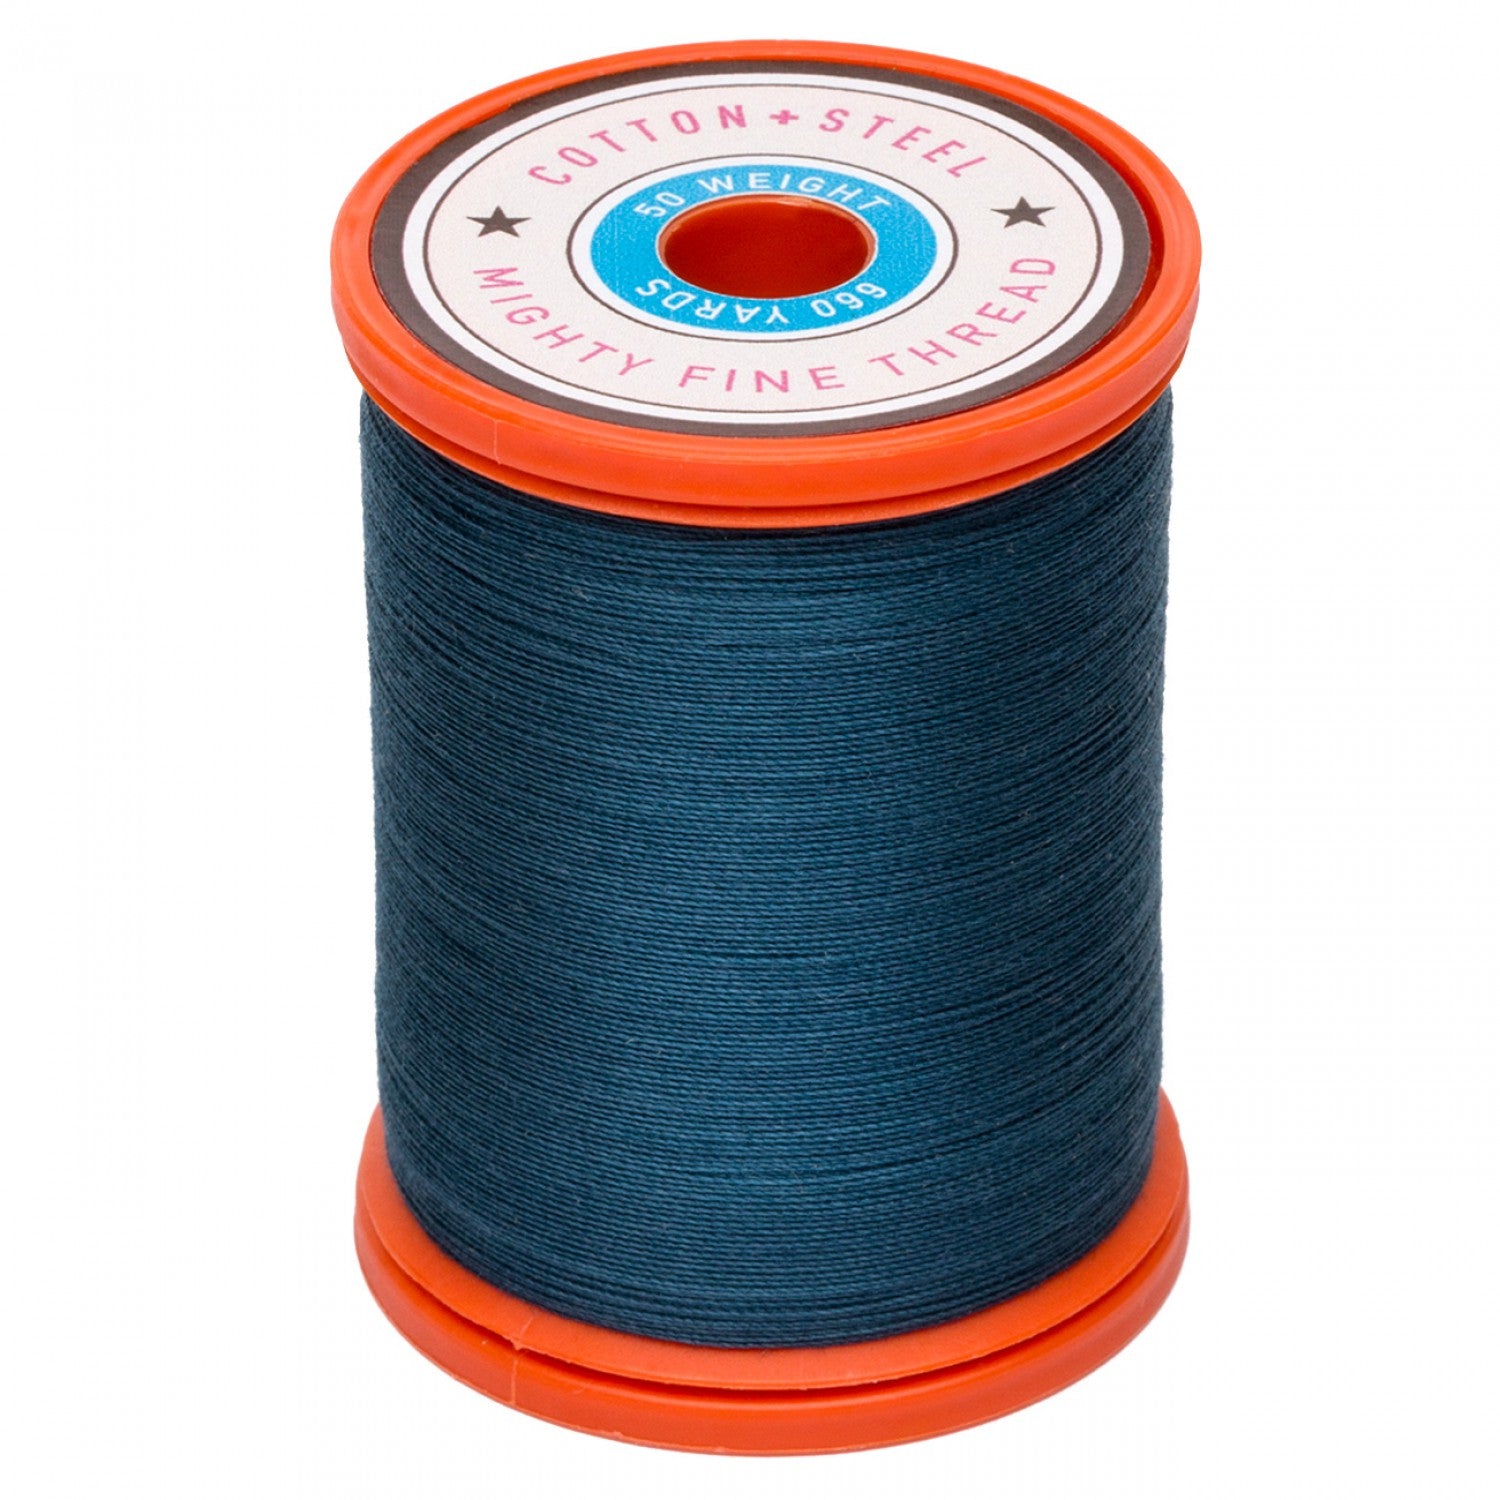 Cotton + Steel 50wt Thread by Sulky - Midnight Teal (1536)